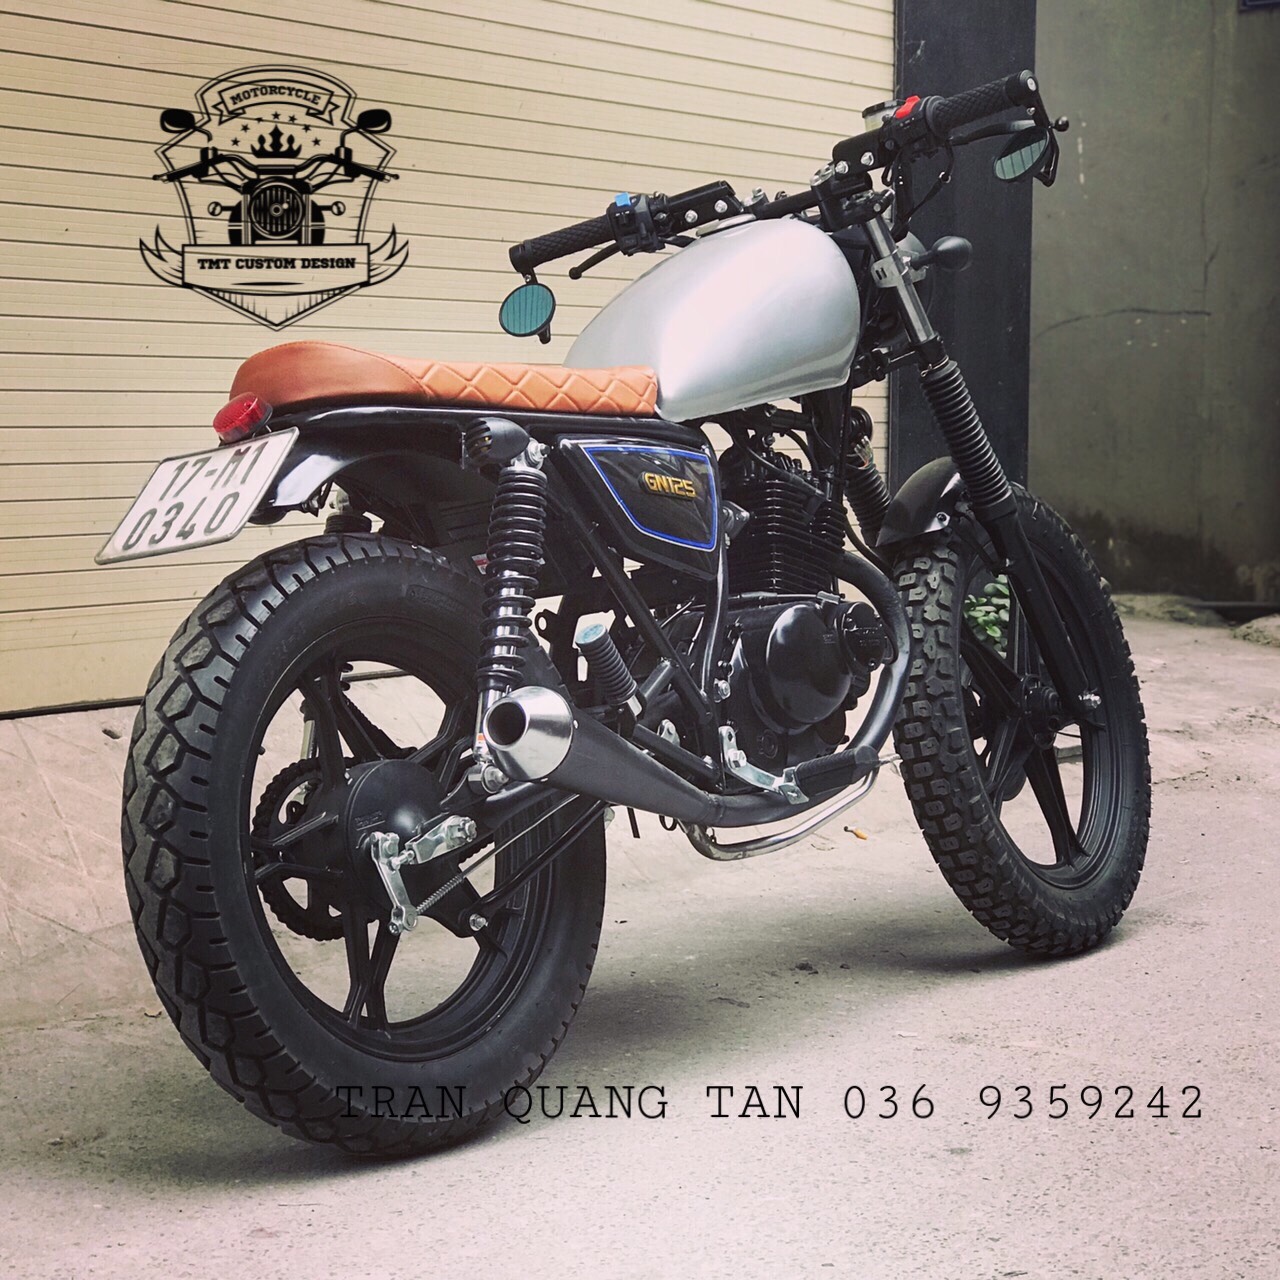 Built for Looks Not for Speed  Photo  Suzuki cafe racer Cafe racer  build Cafe racer